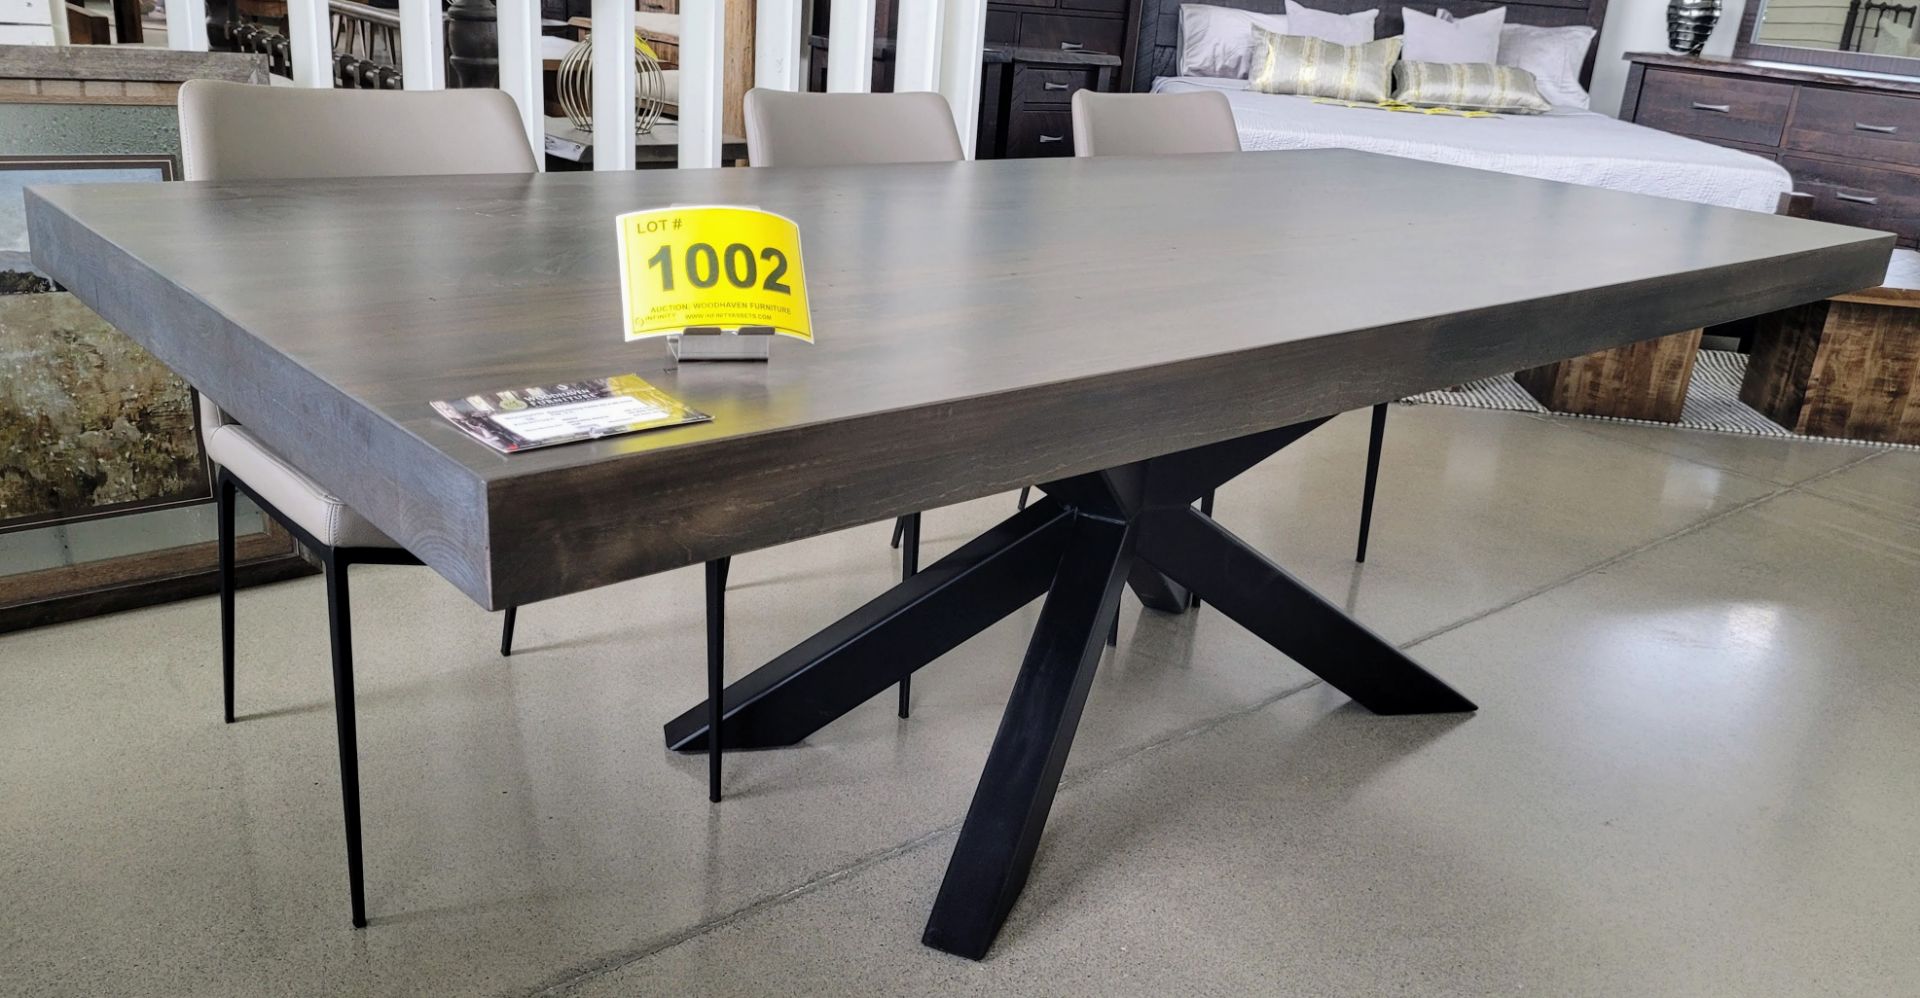 NEXUS DINING TABLE 42" X 96" SOLID TOP, STAIN: MOCHA SILK - MSRP $8,712.00 - (TABLE ONLY - CHAIRS